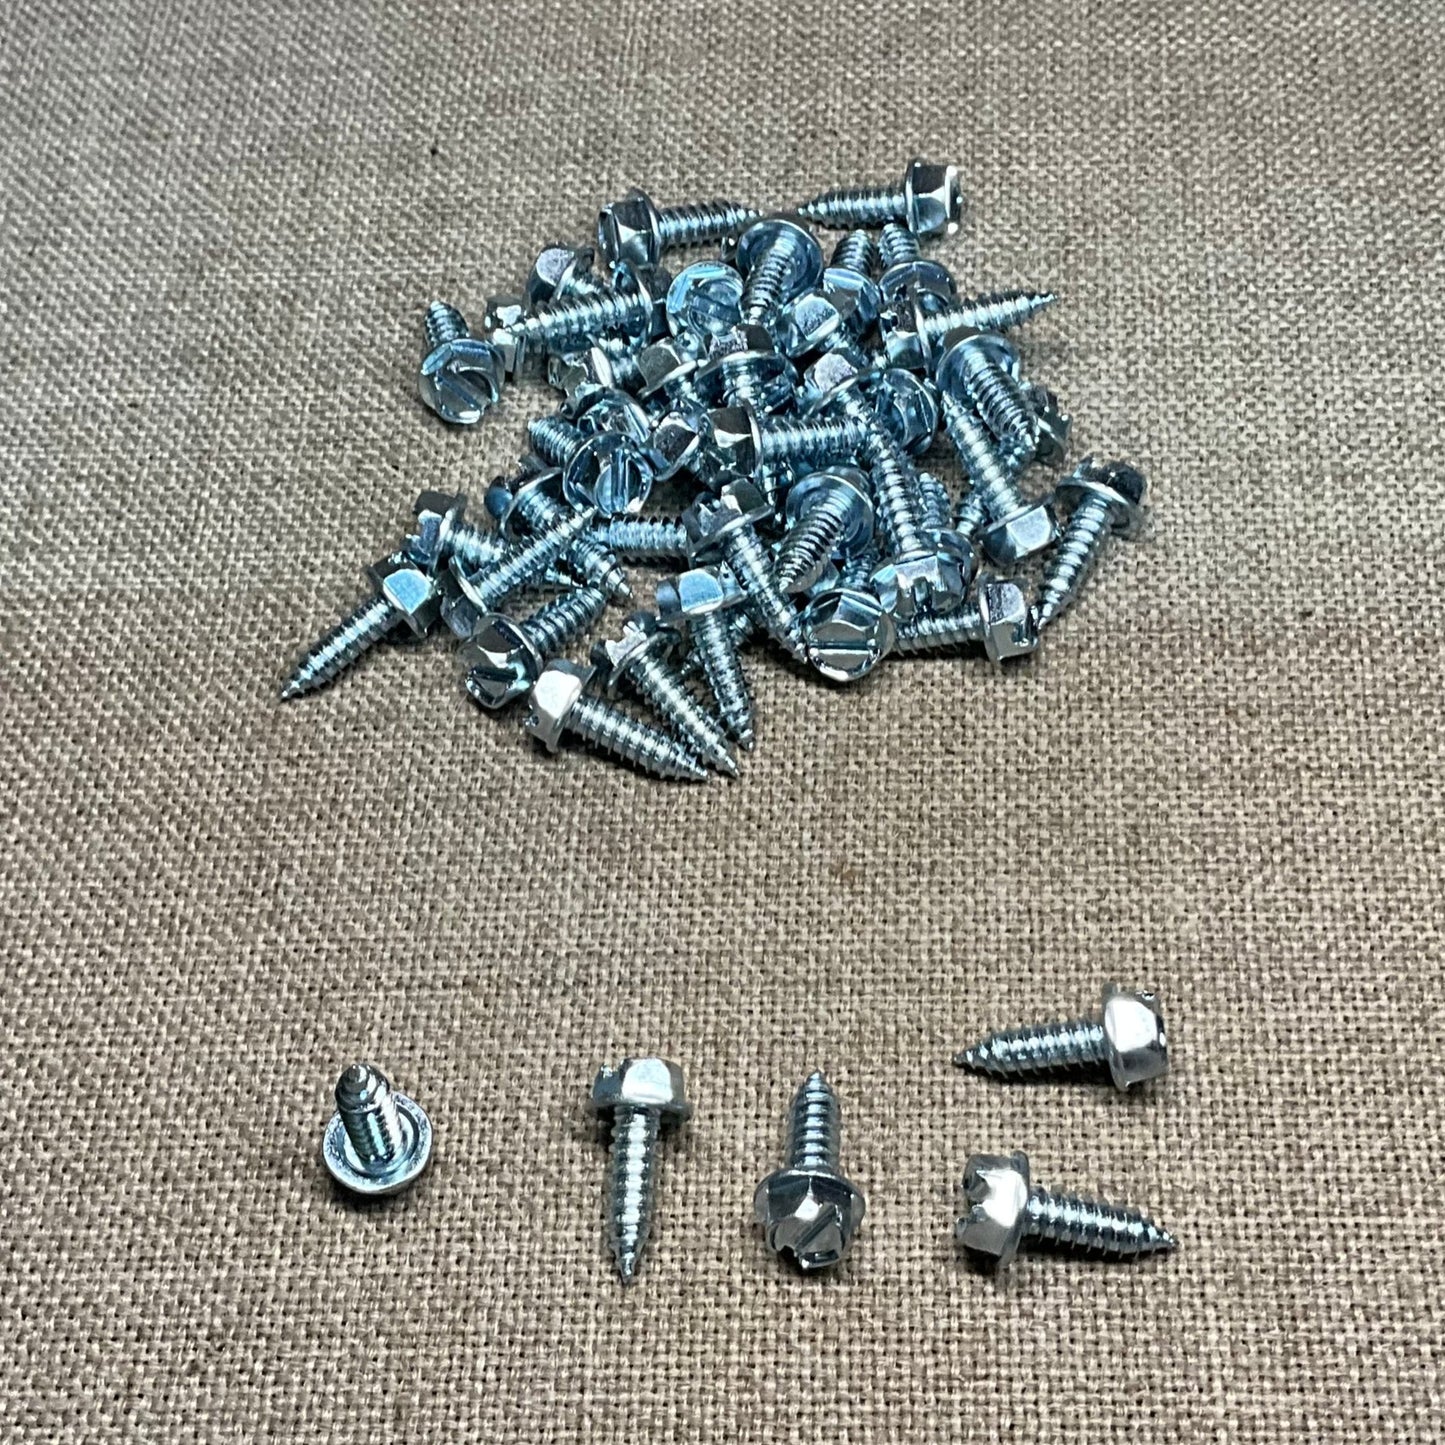 50 License Plate Fasteners Screws Auveco  11369 Ford Car Truck Auto General use